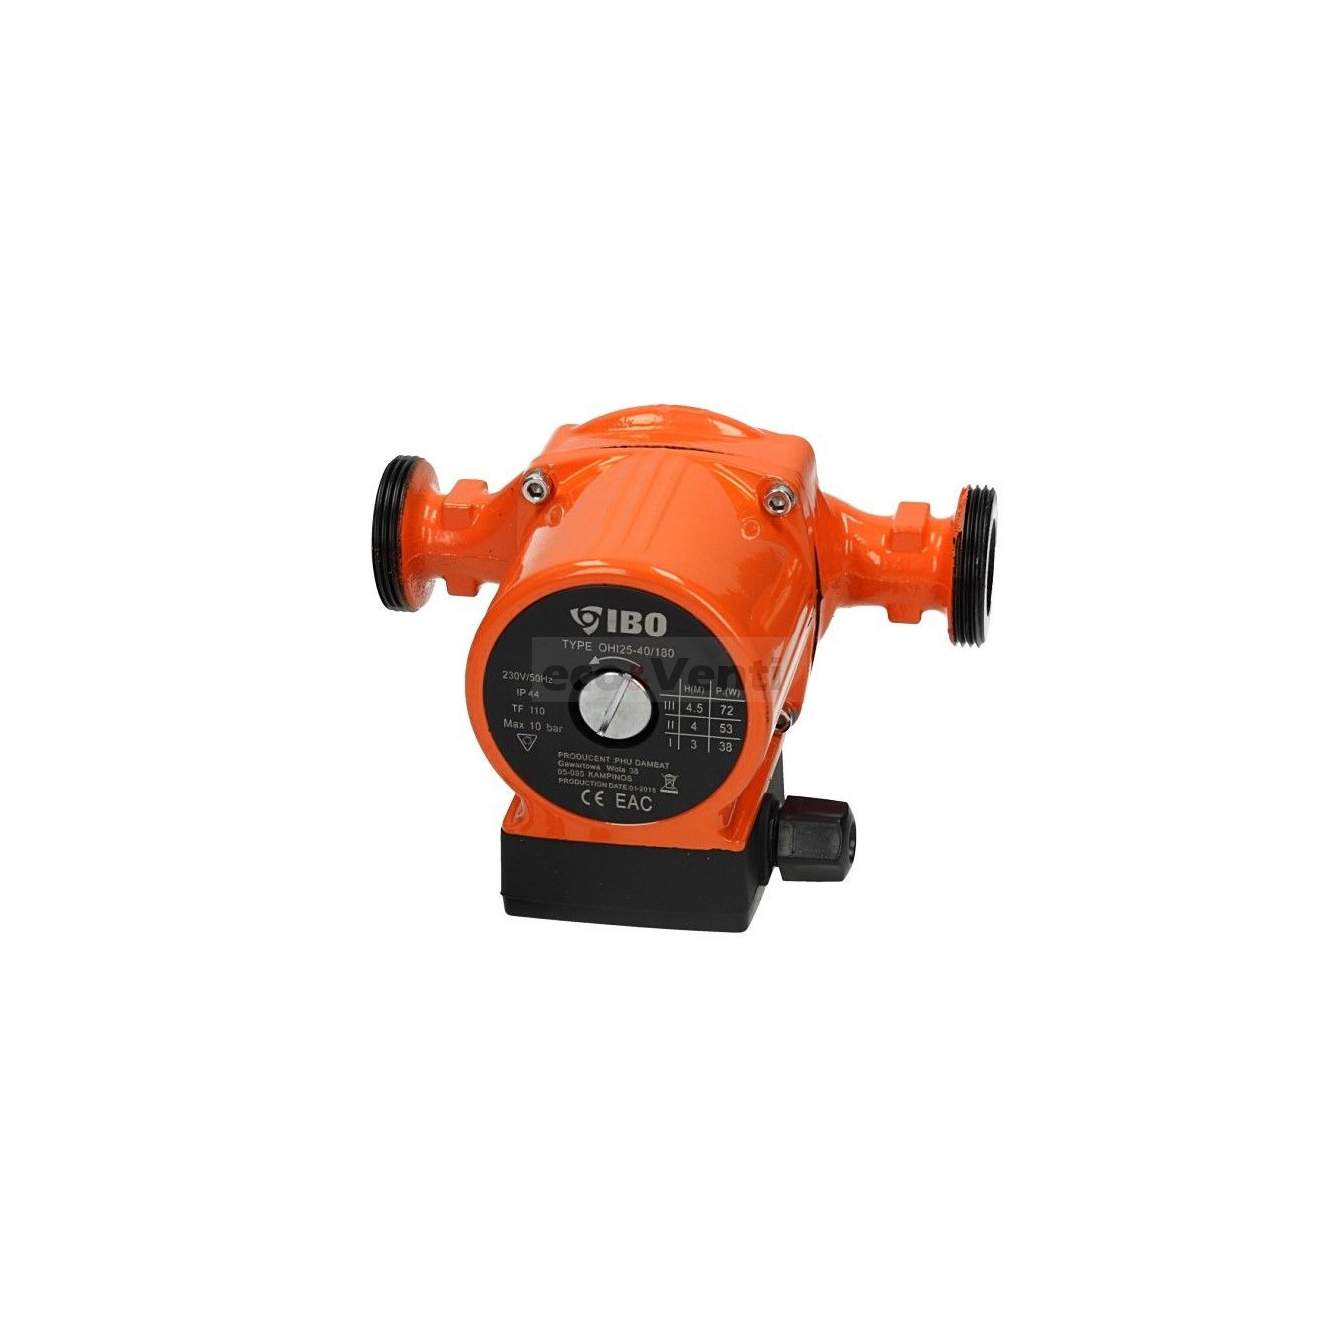 CENTRAL HEATING CIRCULATOR PUMP 40-180 FOR HOT WATER HEATING SYSTEM 